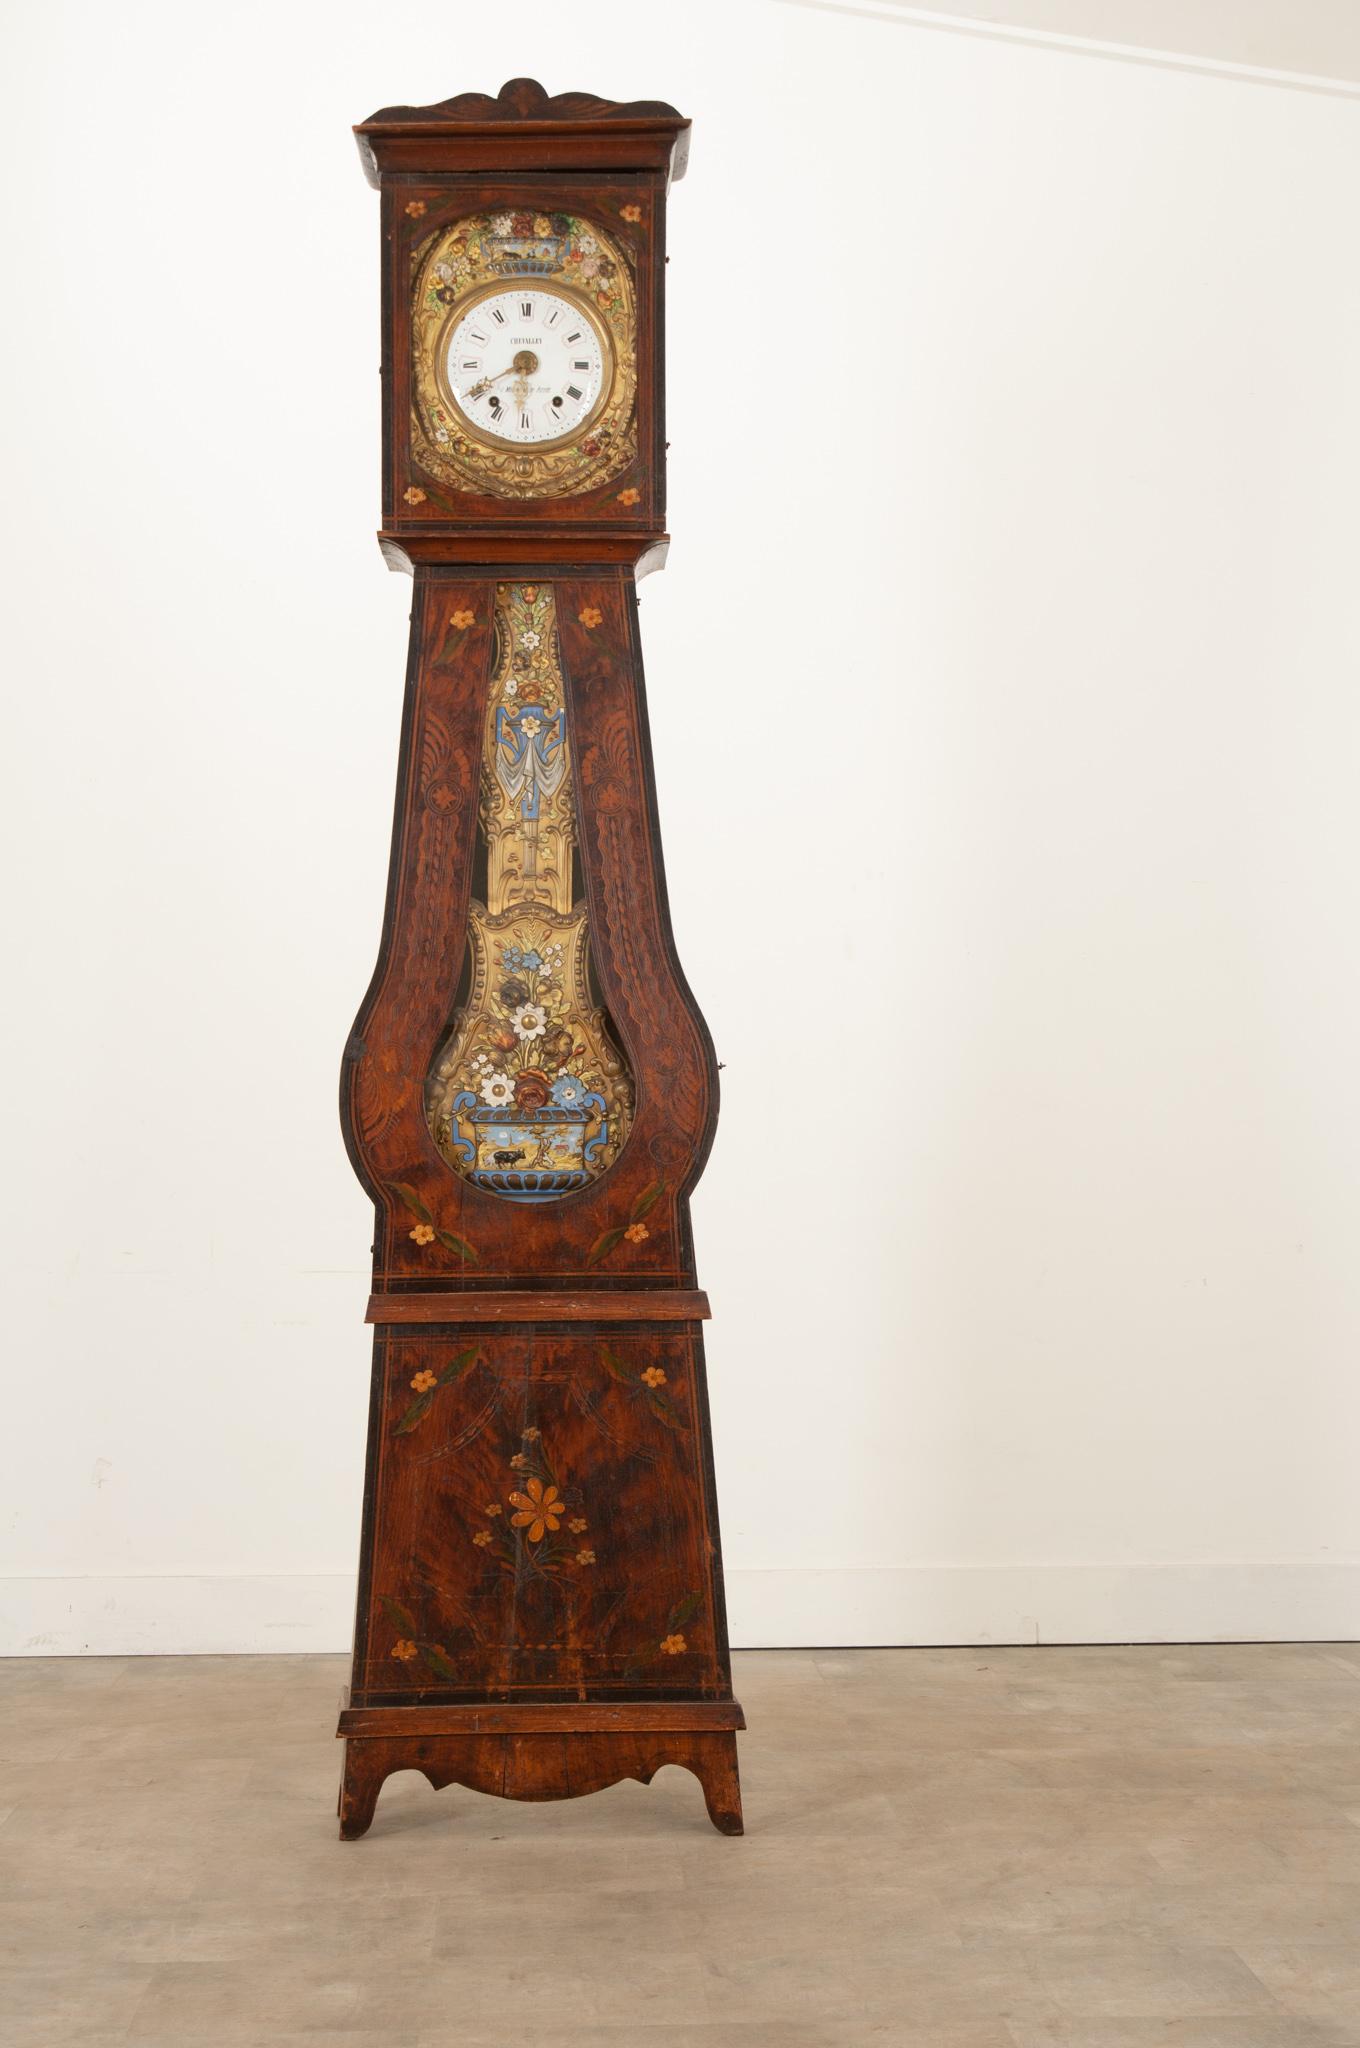 This French 19th century banjo shaped case clock is an eye catching piece in any space. Topped by an ornately carved cornice above the dial faced door. Supported by an intricate brass repousse frontage, the dial face displays hand painted roman